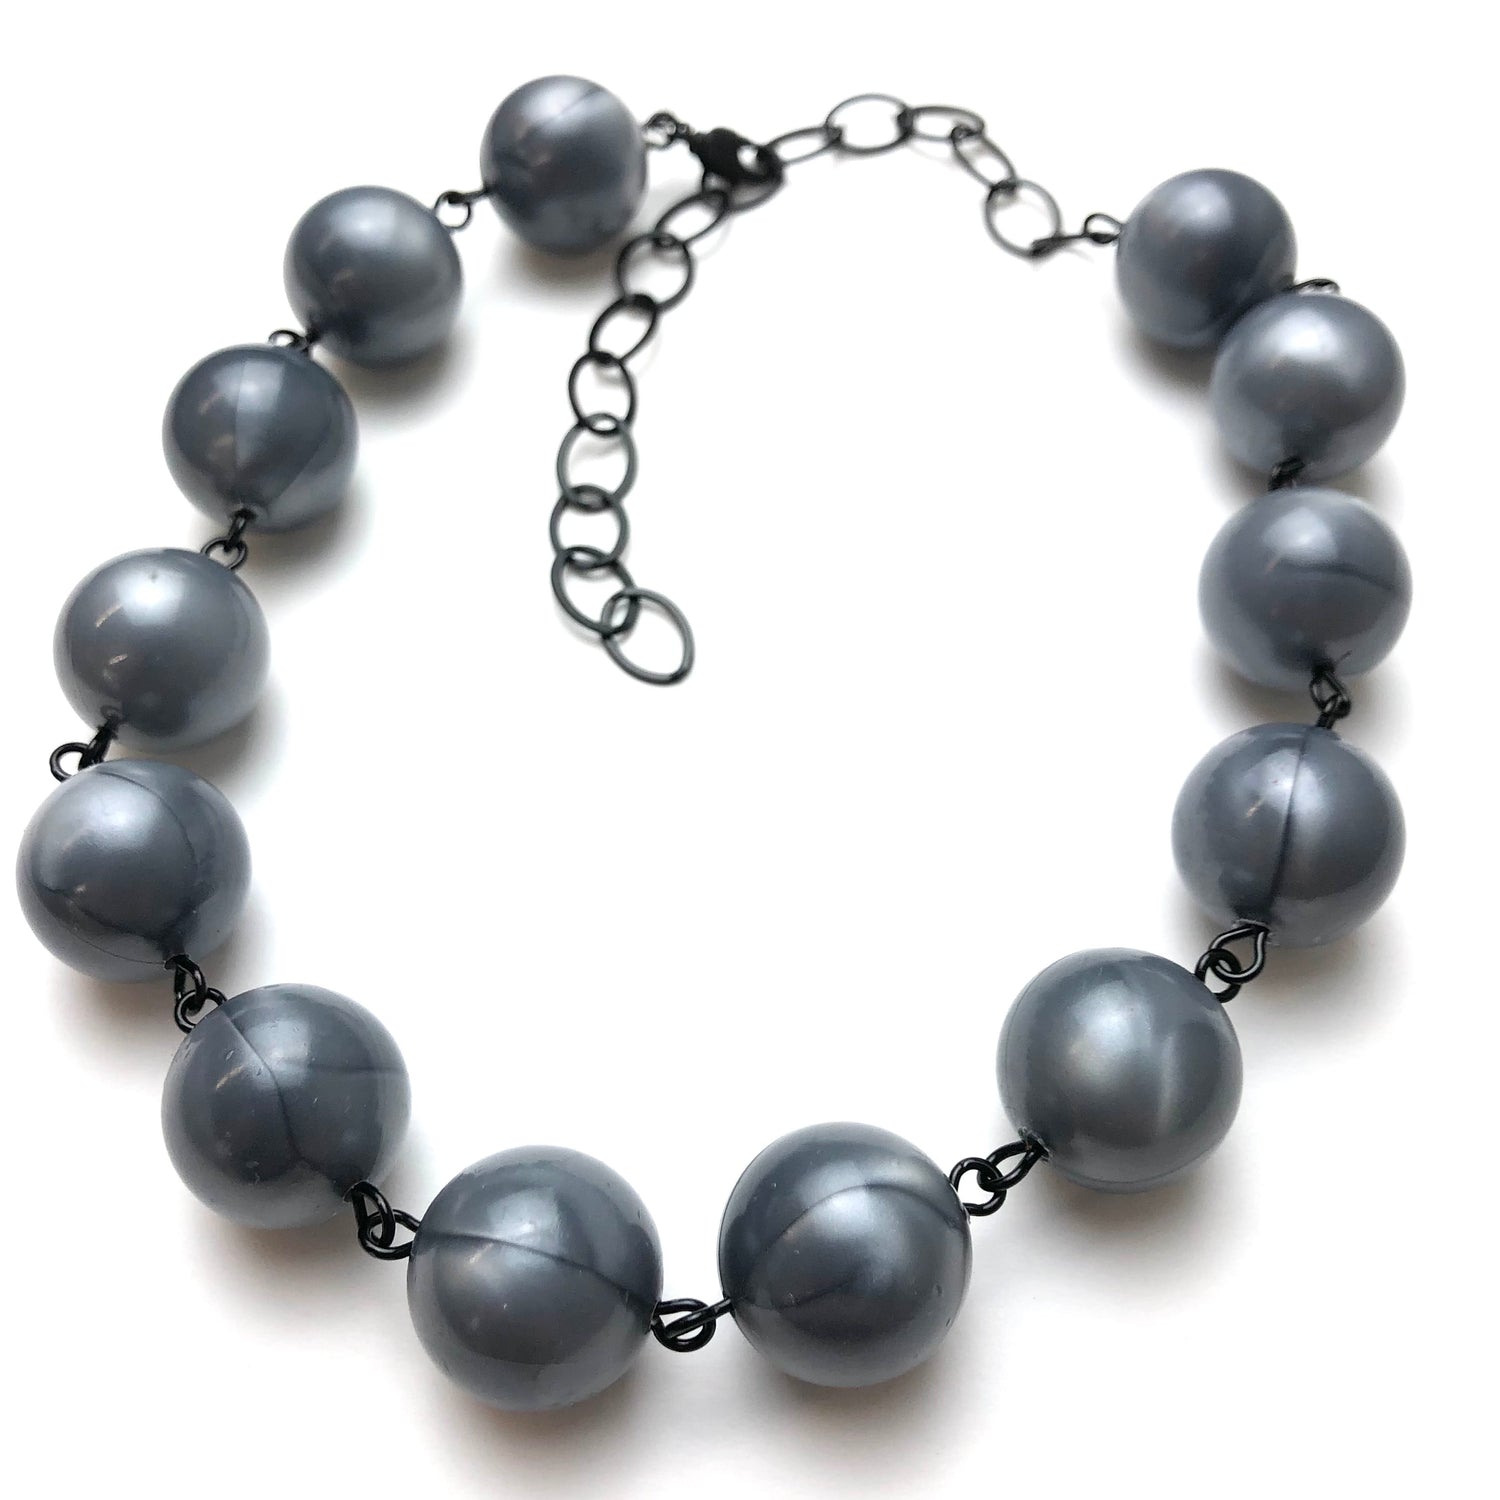 Gray glow necklace